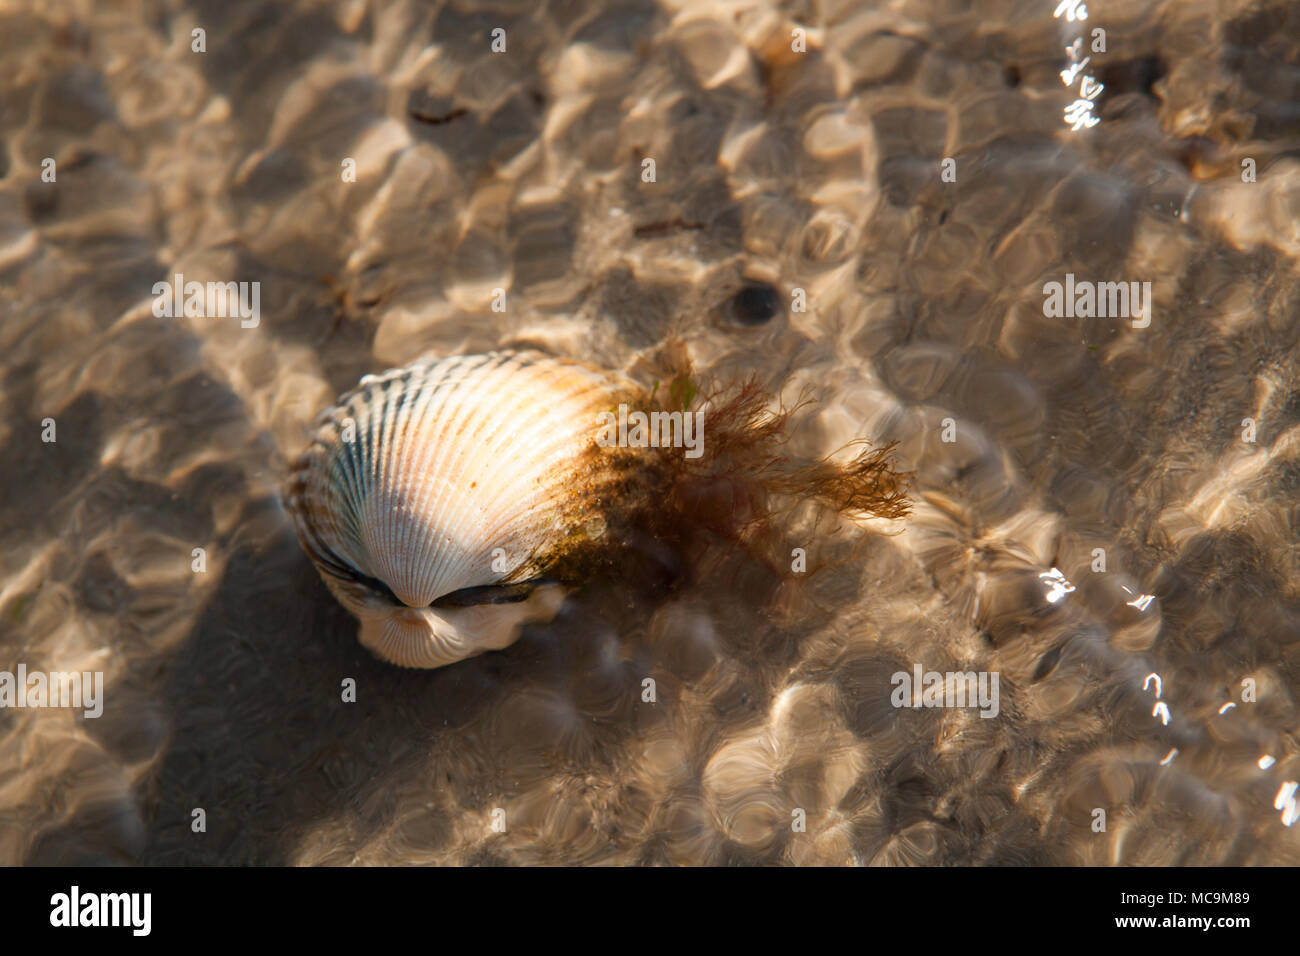 A cockle, Cerastoderma edule, found while foraging for shellfish near Weymouth in Dorset UK. Stock Photo